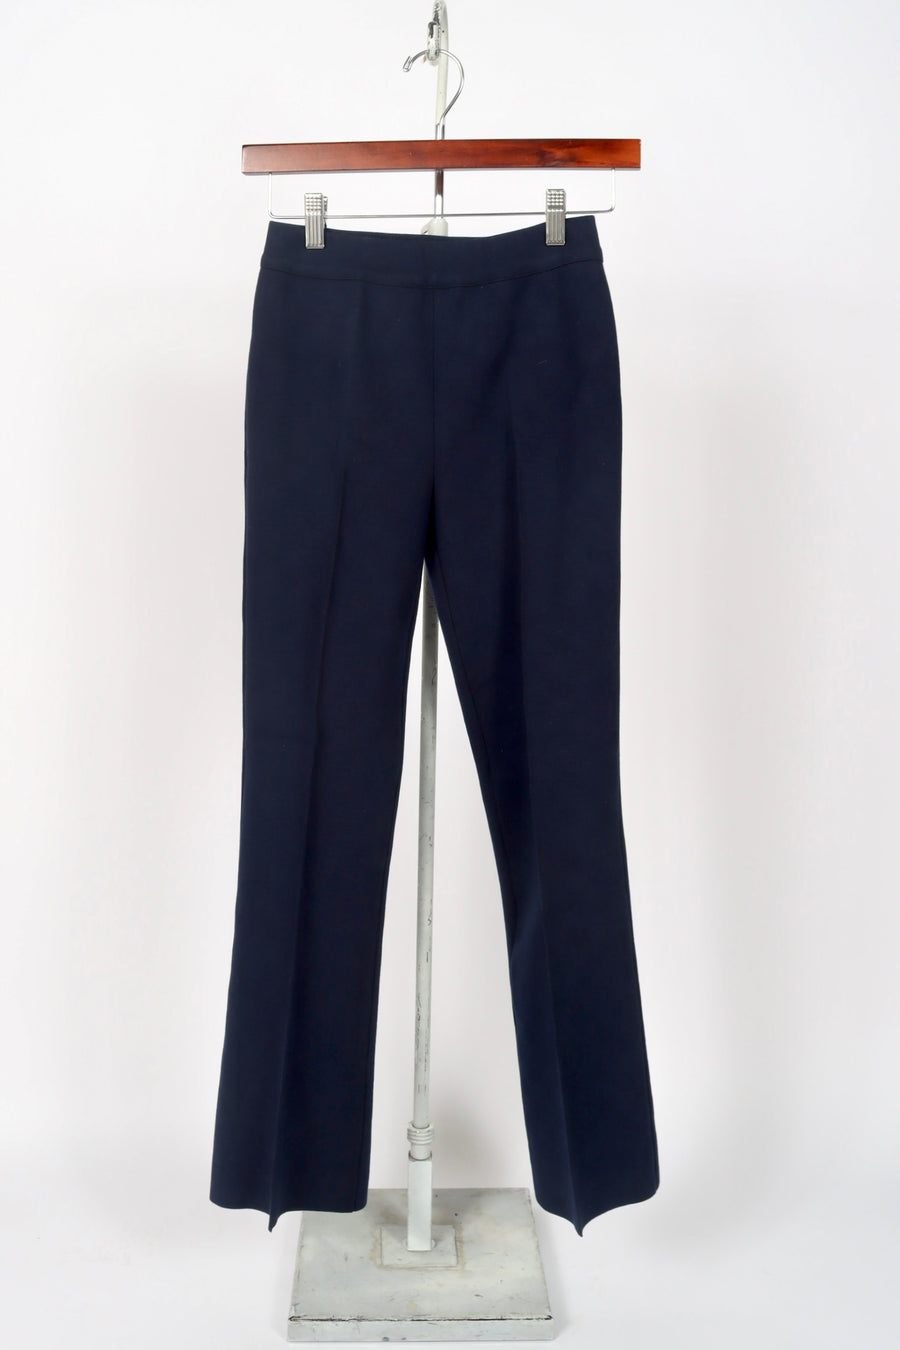 Kick Pant - Navy (By Phone Order Only)